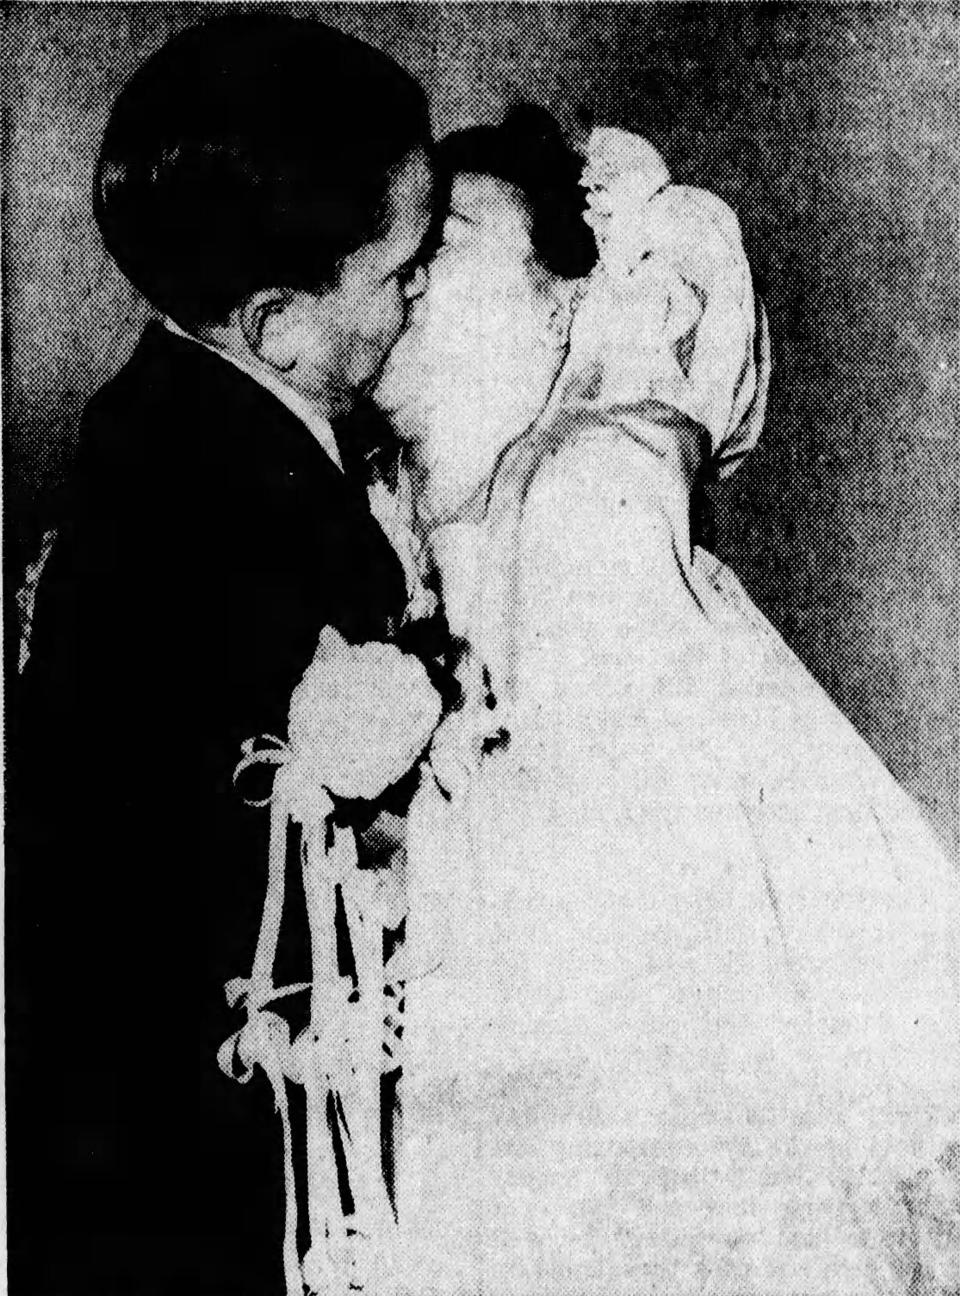 Meinhardt Raabe kisses his bride, Marie, on Dec. 15, 1946, at East Market Street Church of Christ in Akron. The wedding made front-page news in the Beacon Journal.